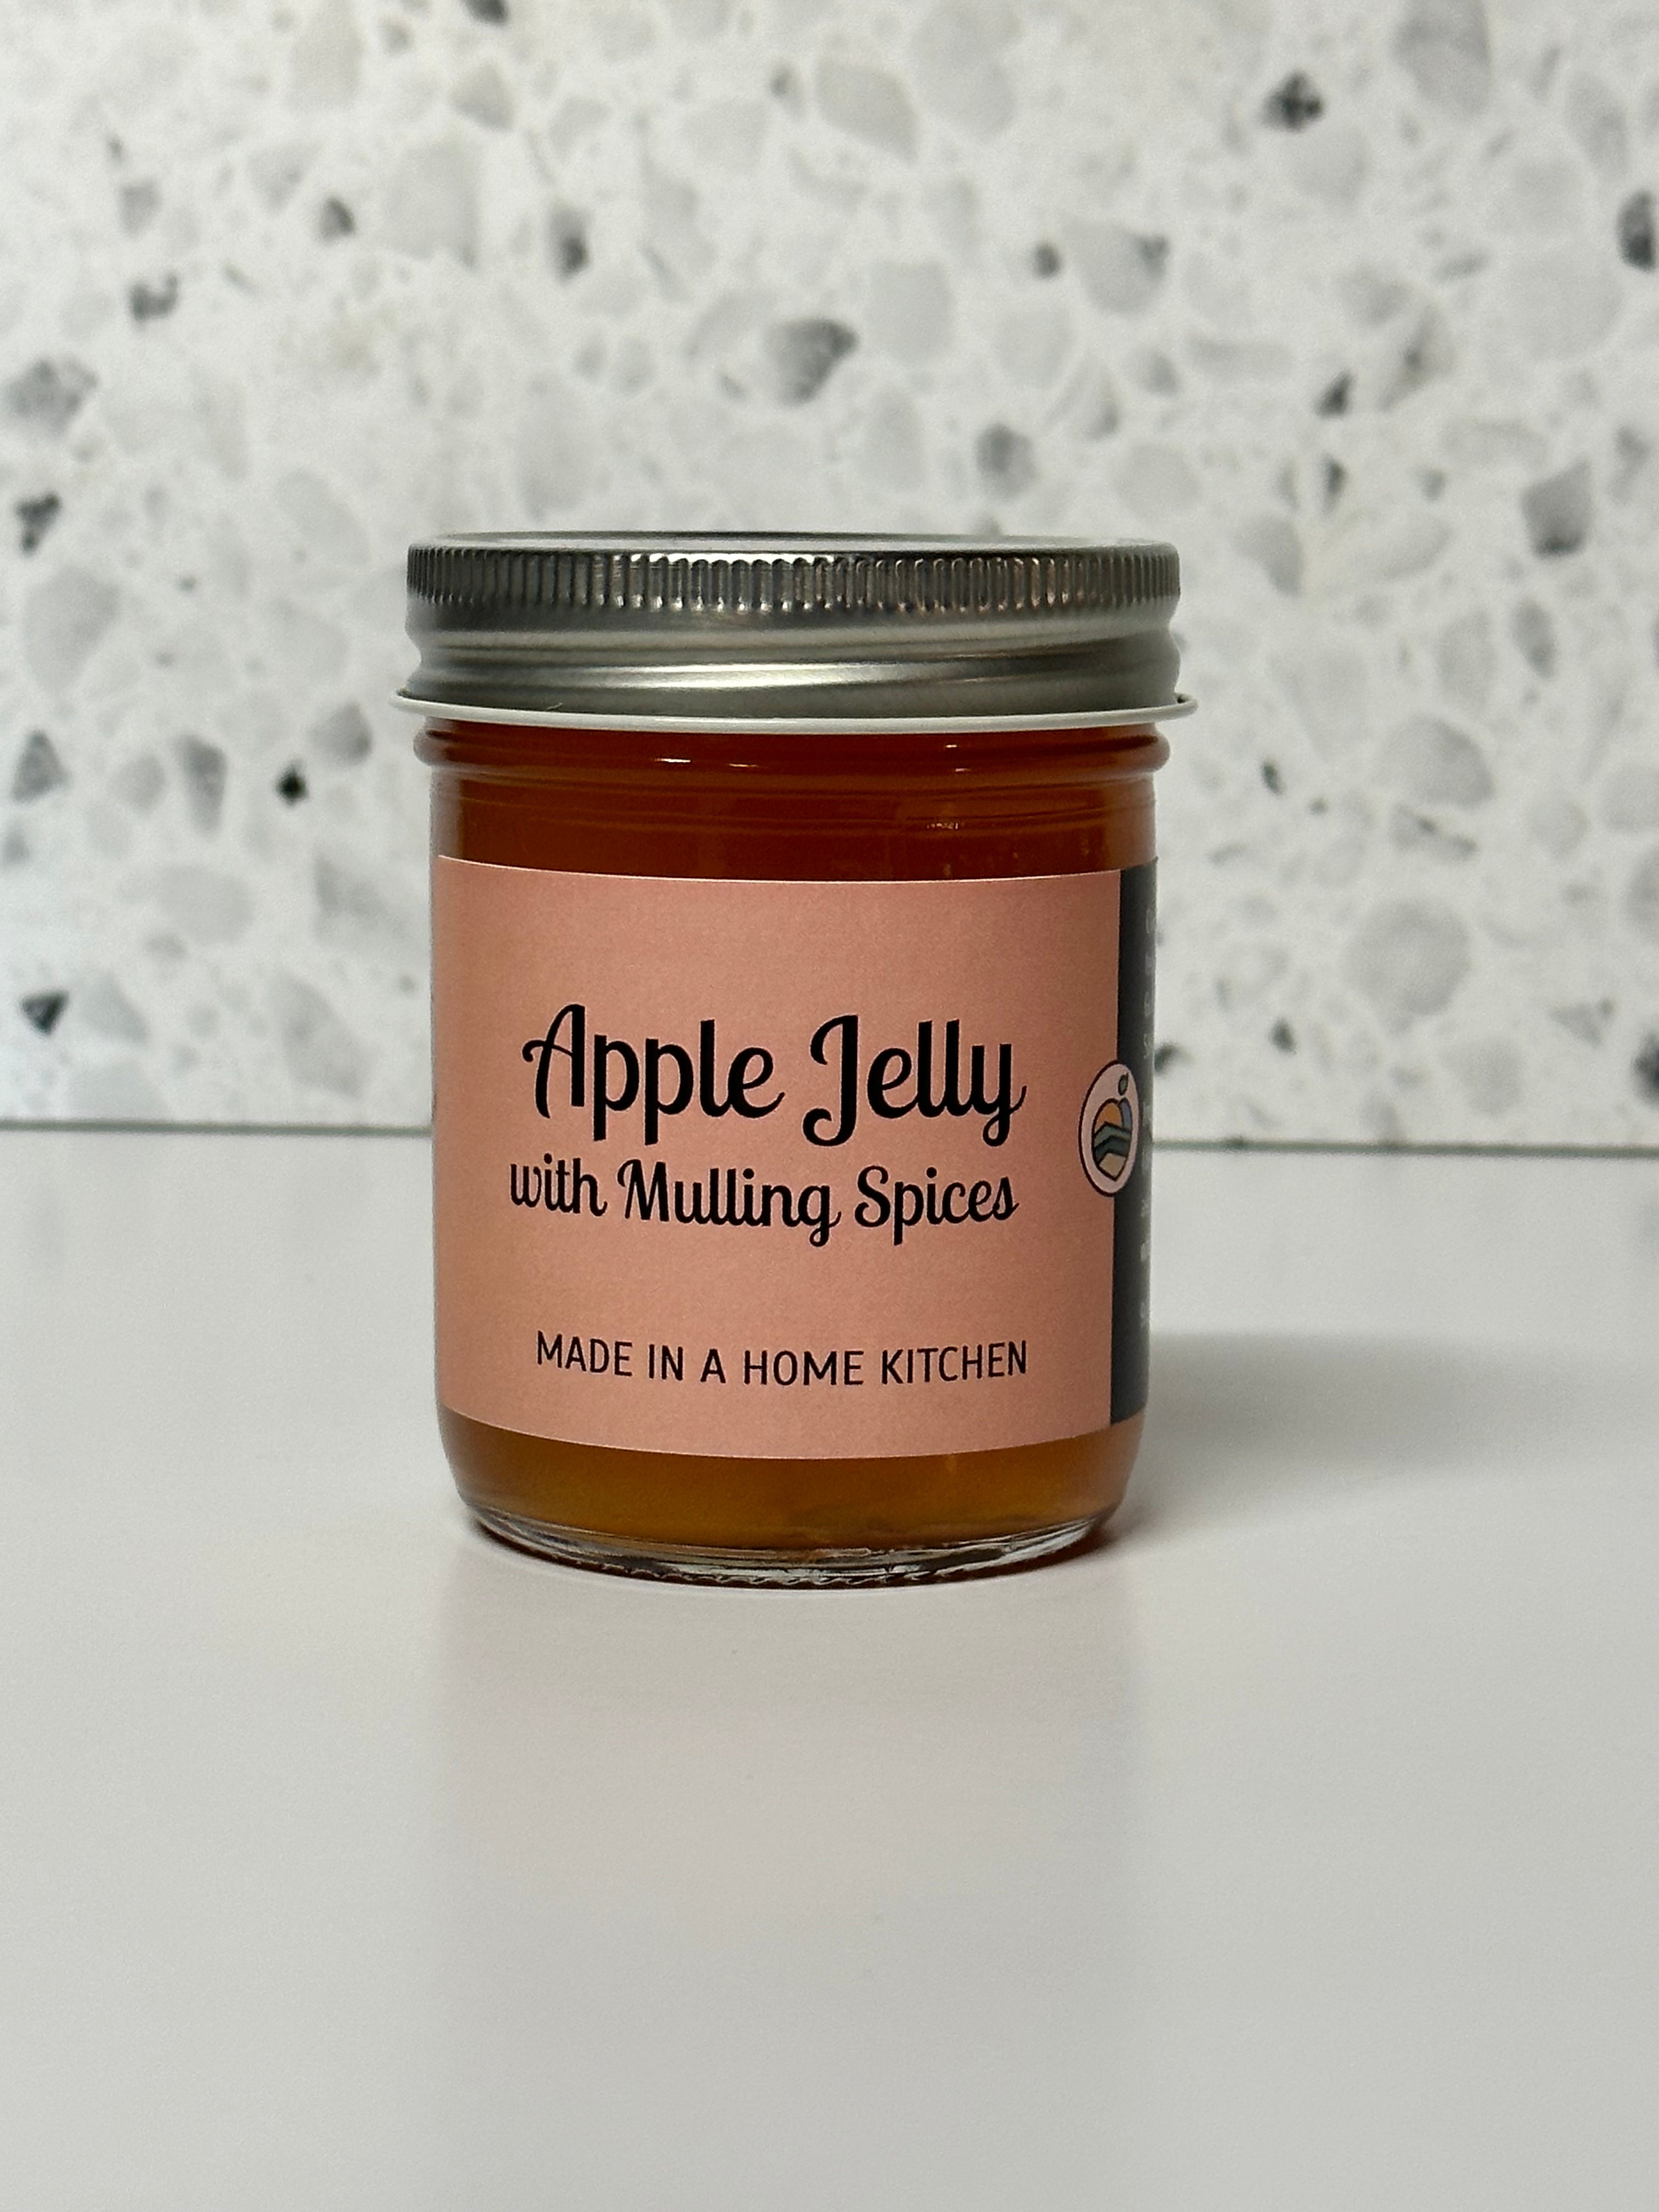 Apple Jelly with Mulling Spices